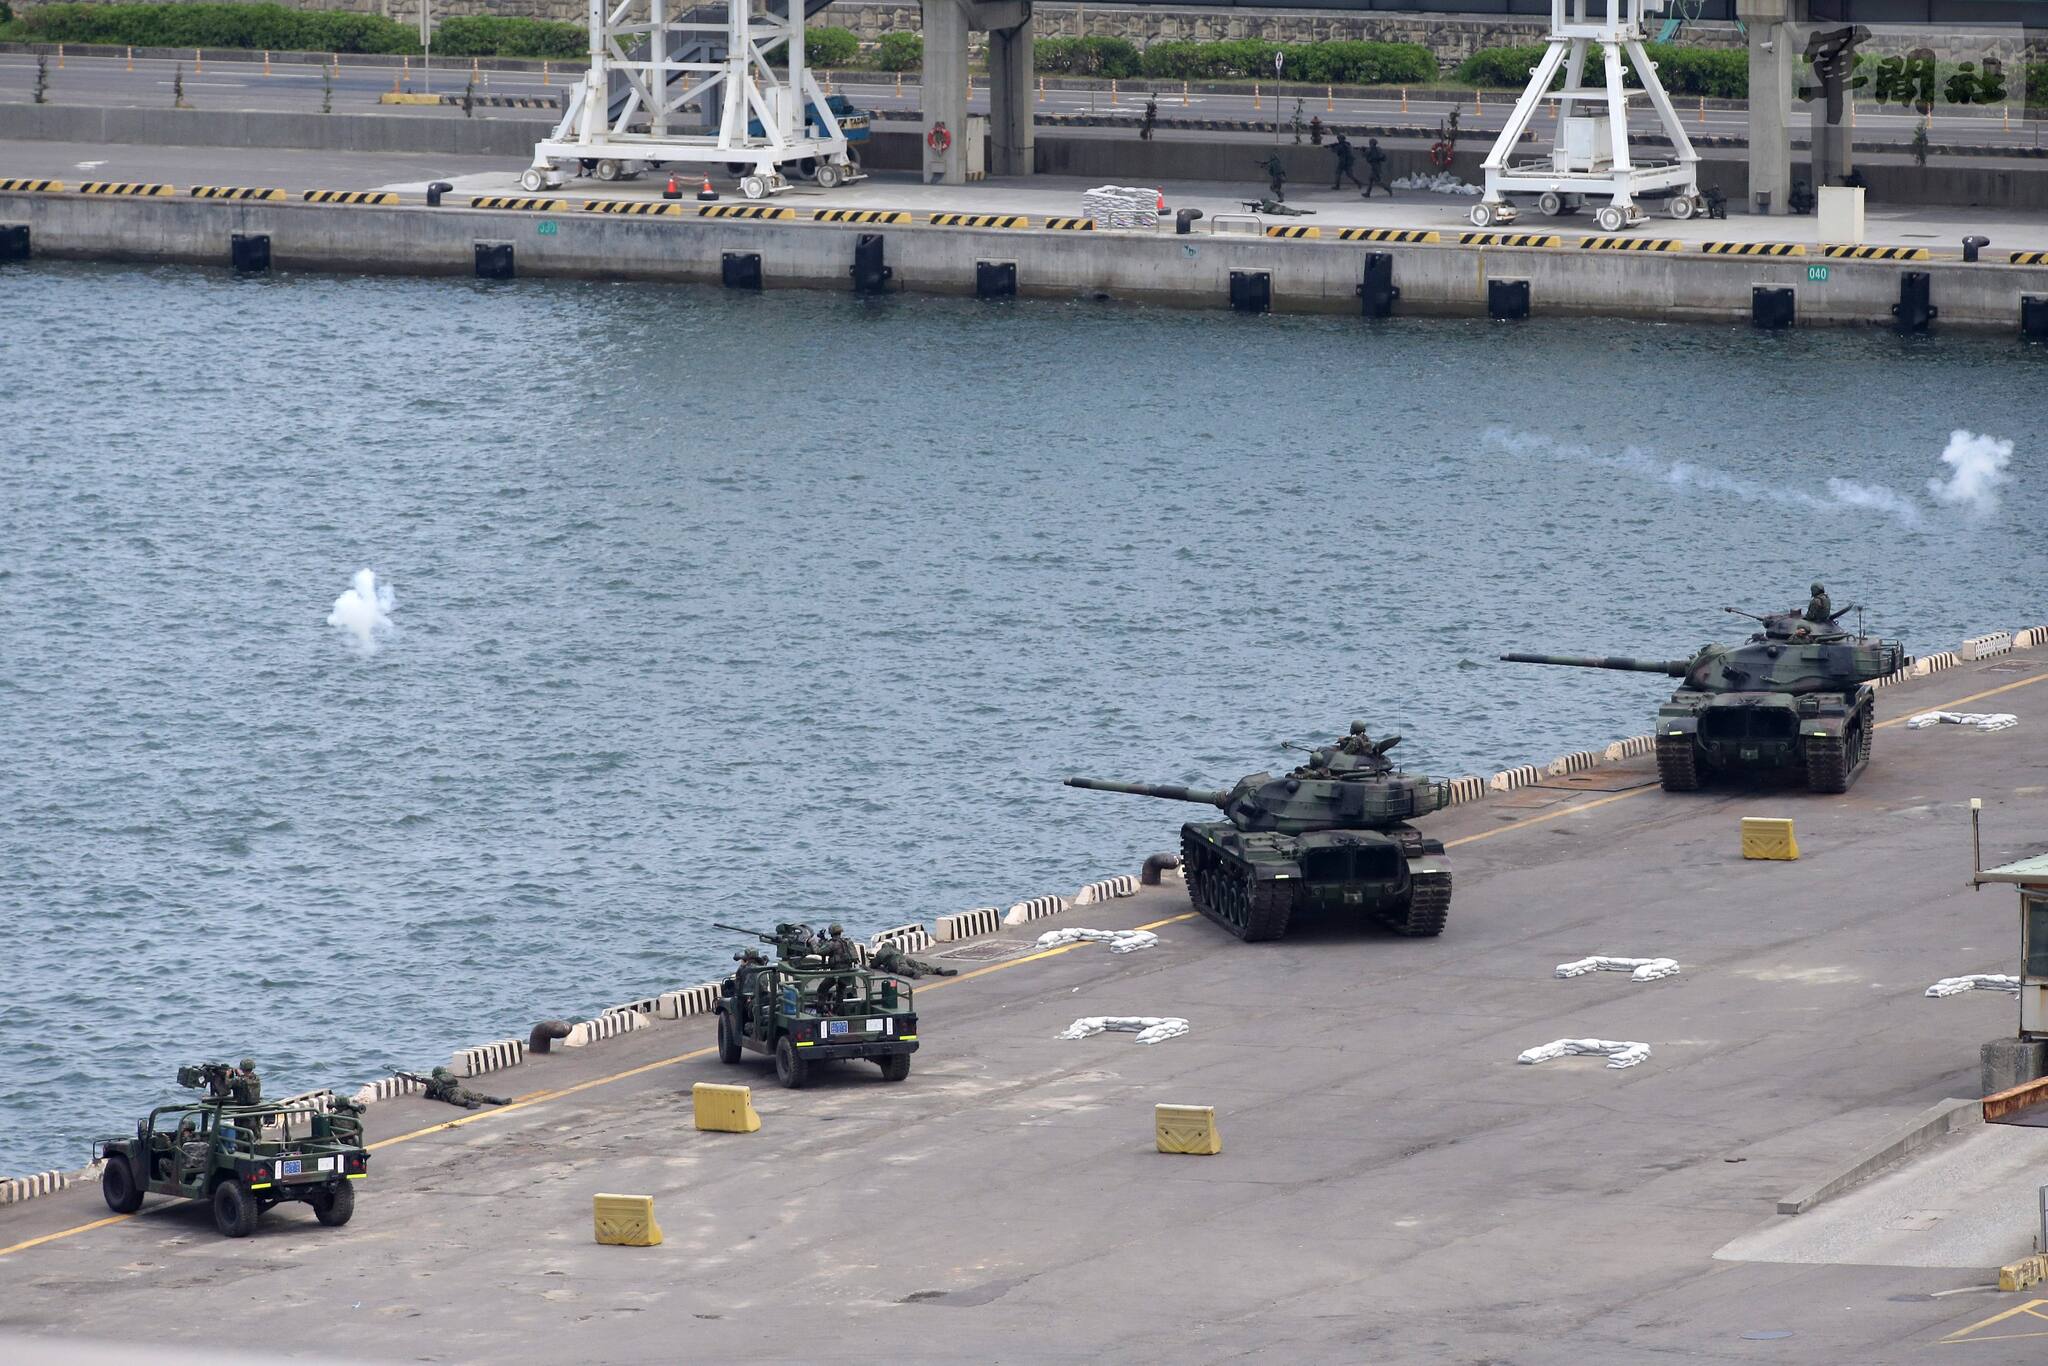 Taiwan military forces conduct anti-landing drills during the annual Han Kuang military exercises near New Taipei City in Taiwan on July 27, 2022. (Image: AP/PTI)